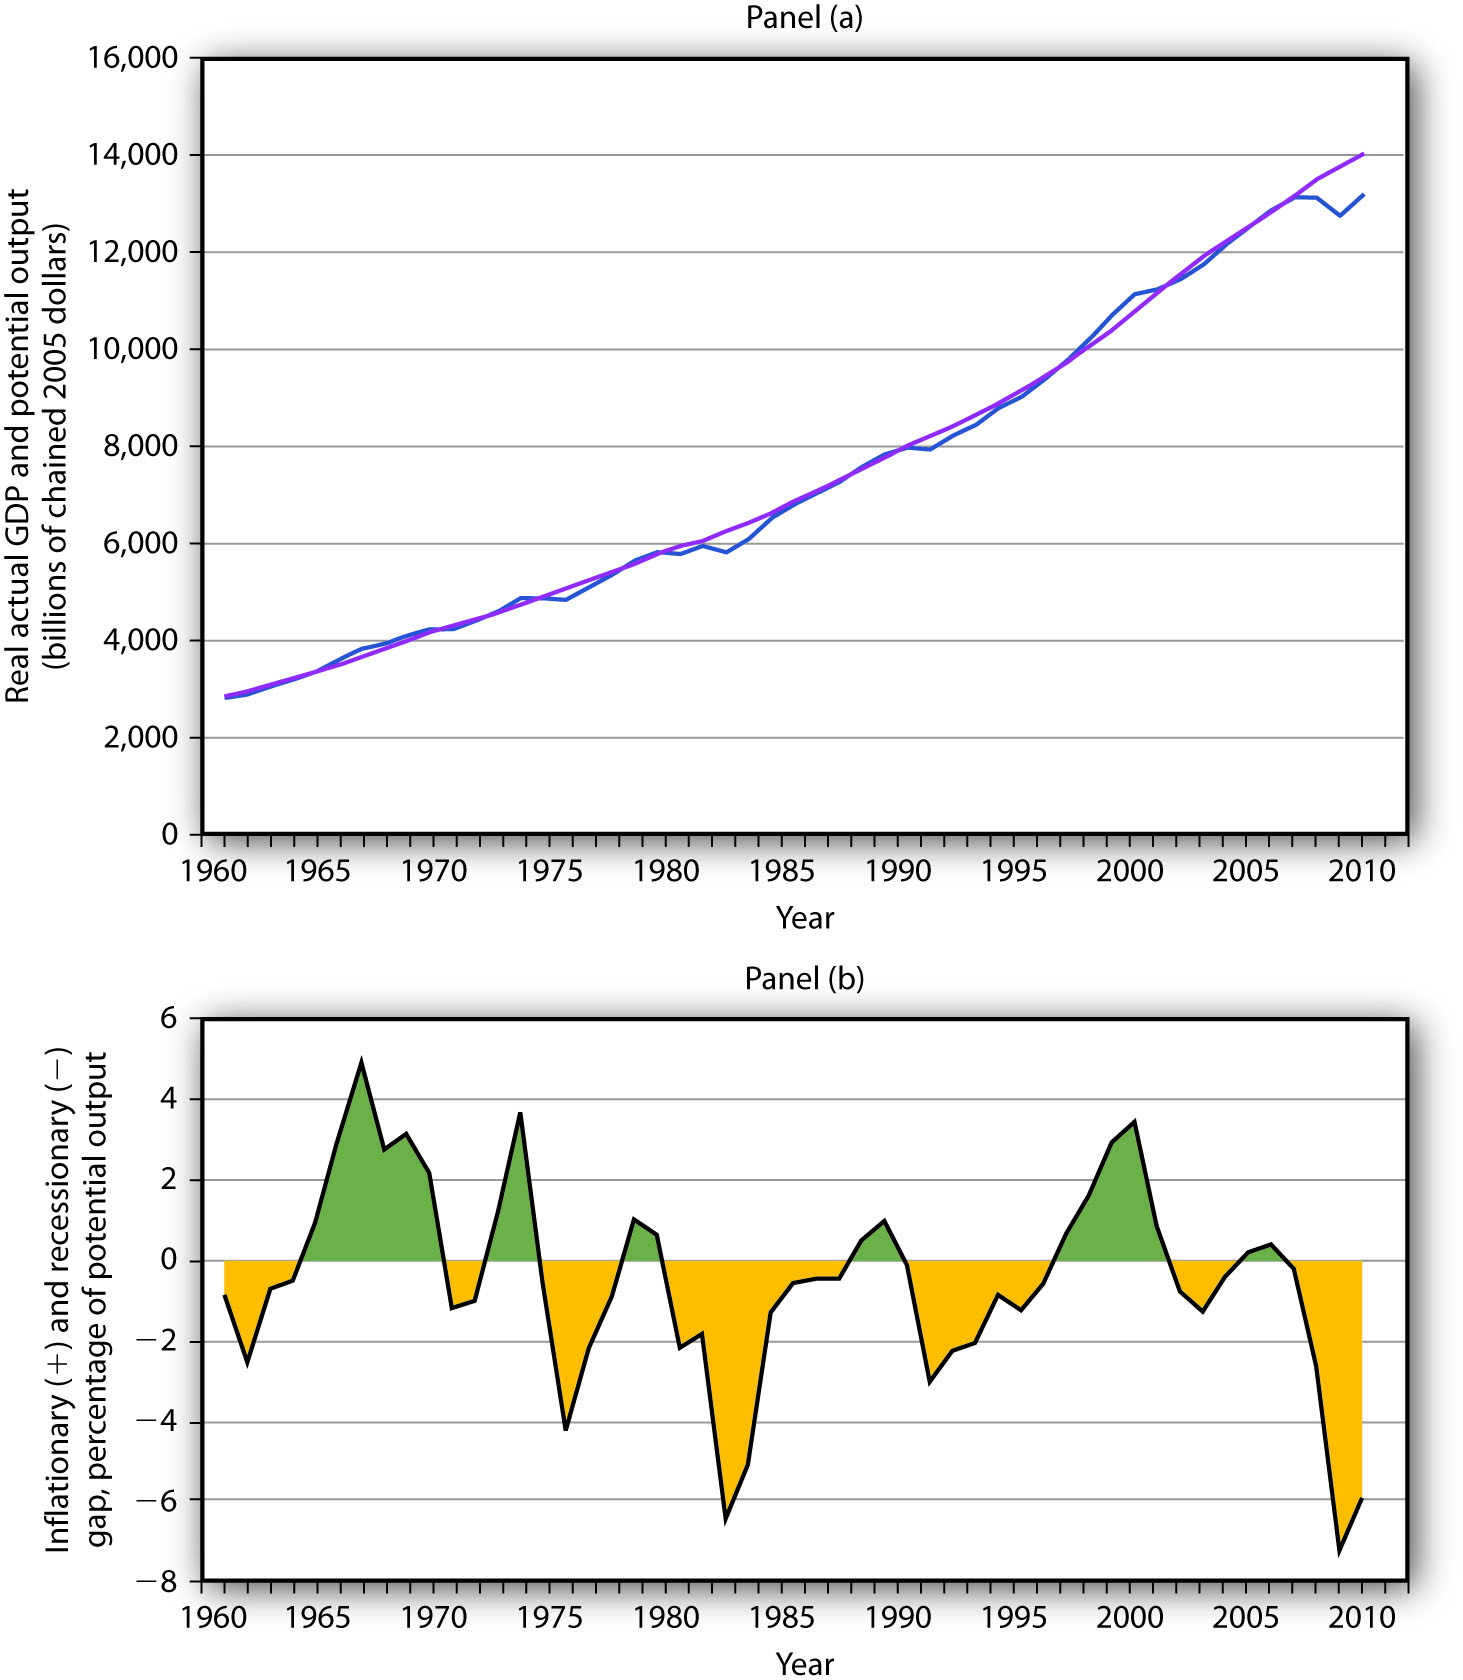 Real GDP and Potential Output. Panel (a) shows potential output (the blue line) and actual real GDP (the purple line) since 1960. Panel (b) shows the gap between potential and actual real GDP expressed as a percentage of potential output. Inflationary gaps are shown in green and recessionary gaps are shown in yellow.